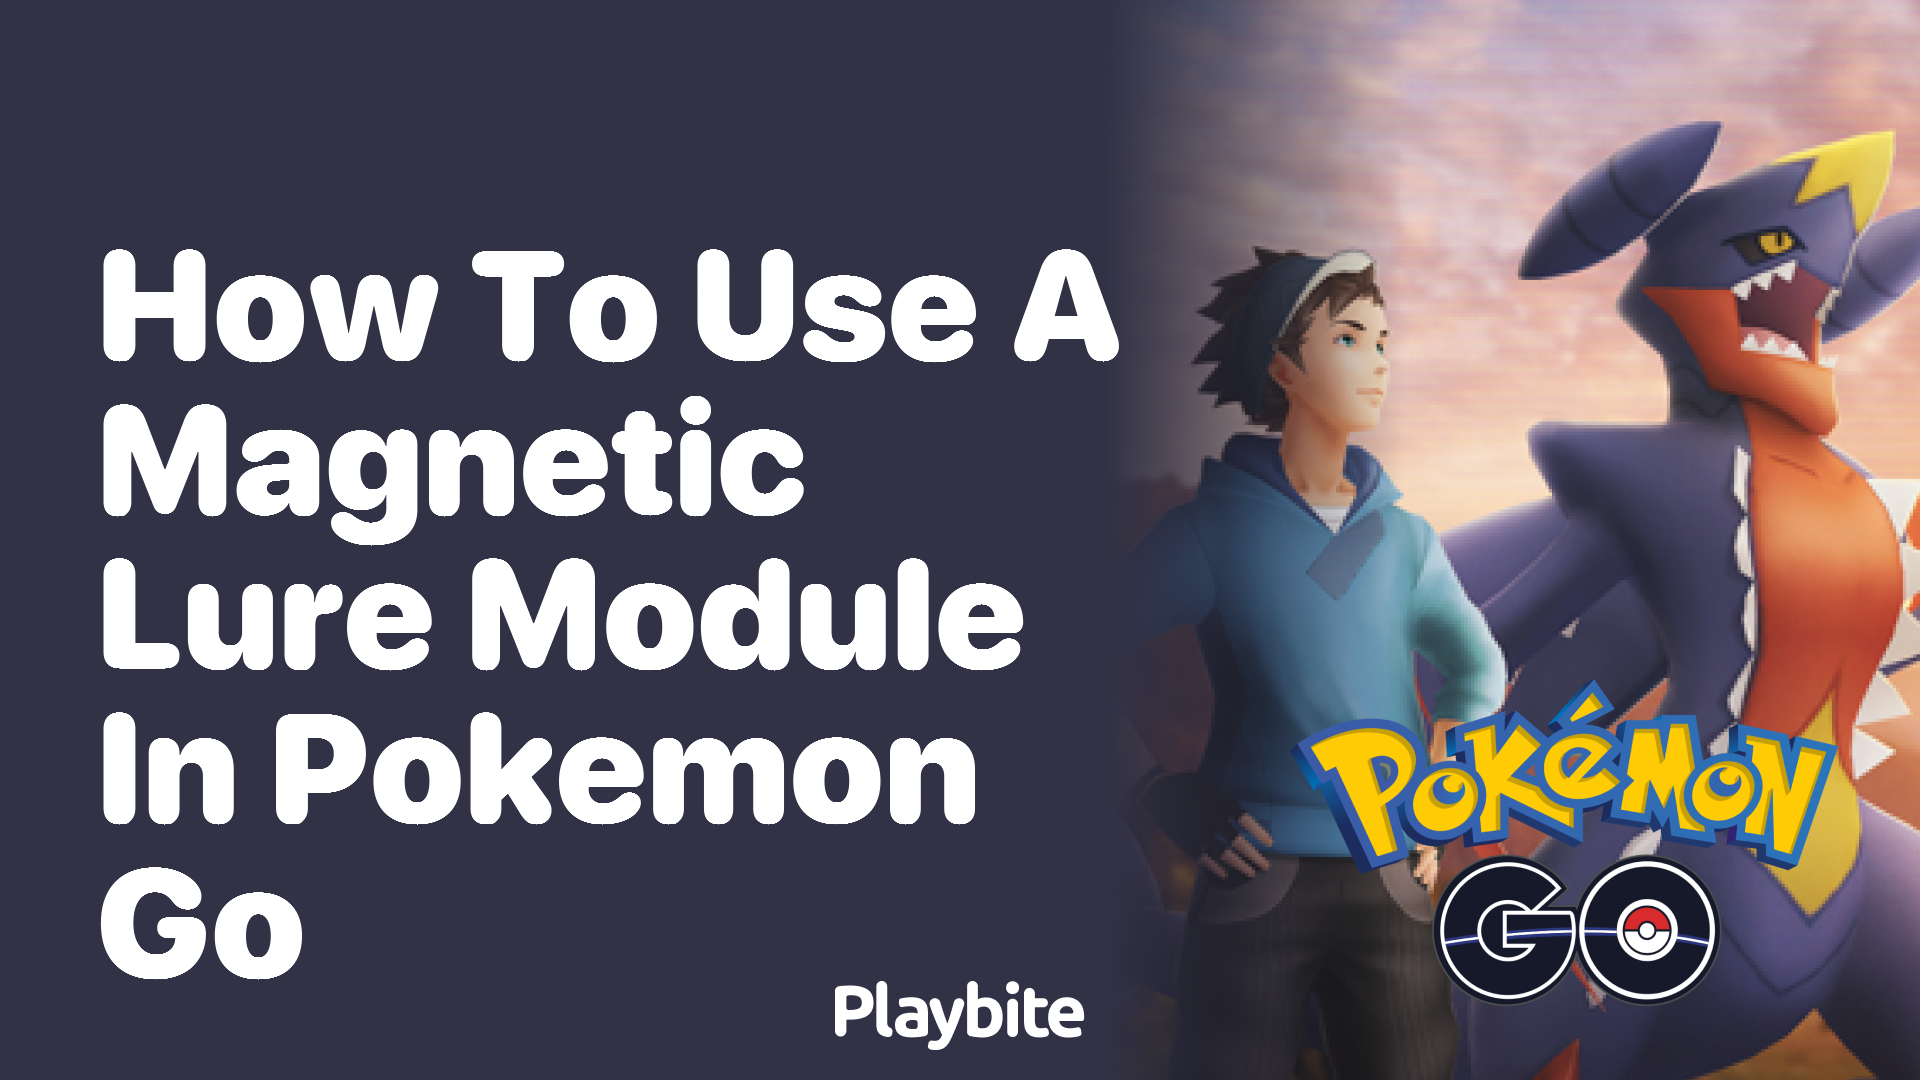 How to Use a Magnetic Lure Module in Pokemon GO - Playbite